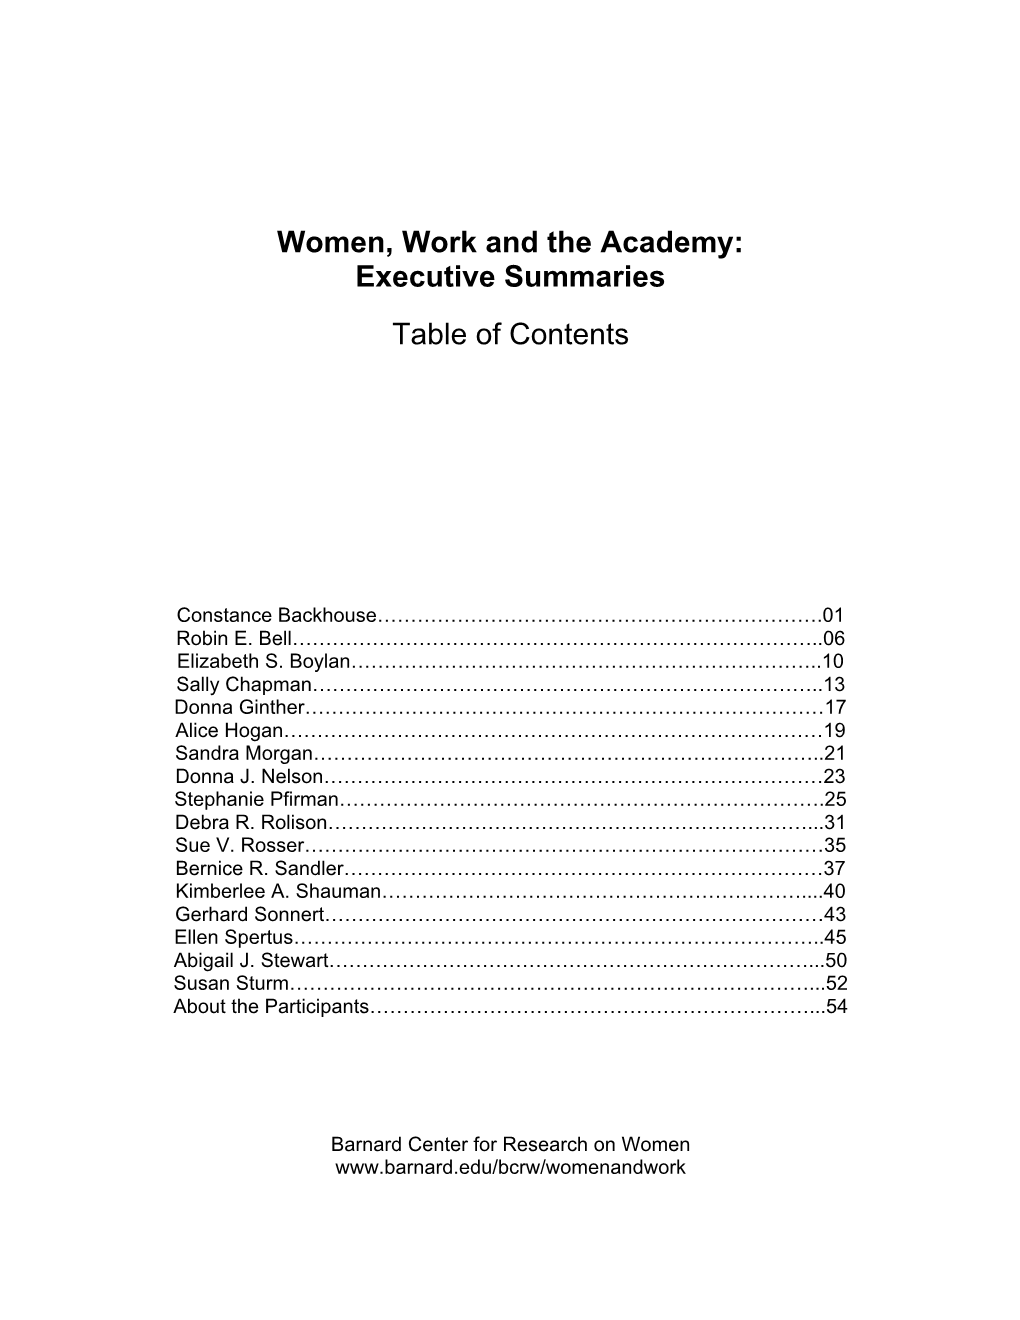 Women, Work and the Academy: Executive Summaries Table of Contents